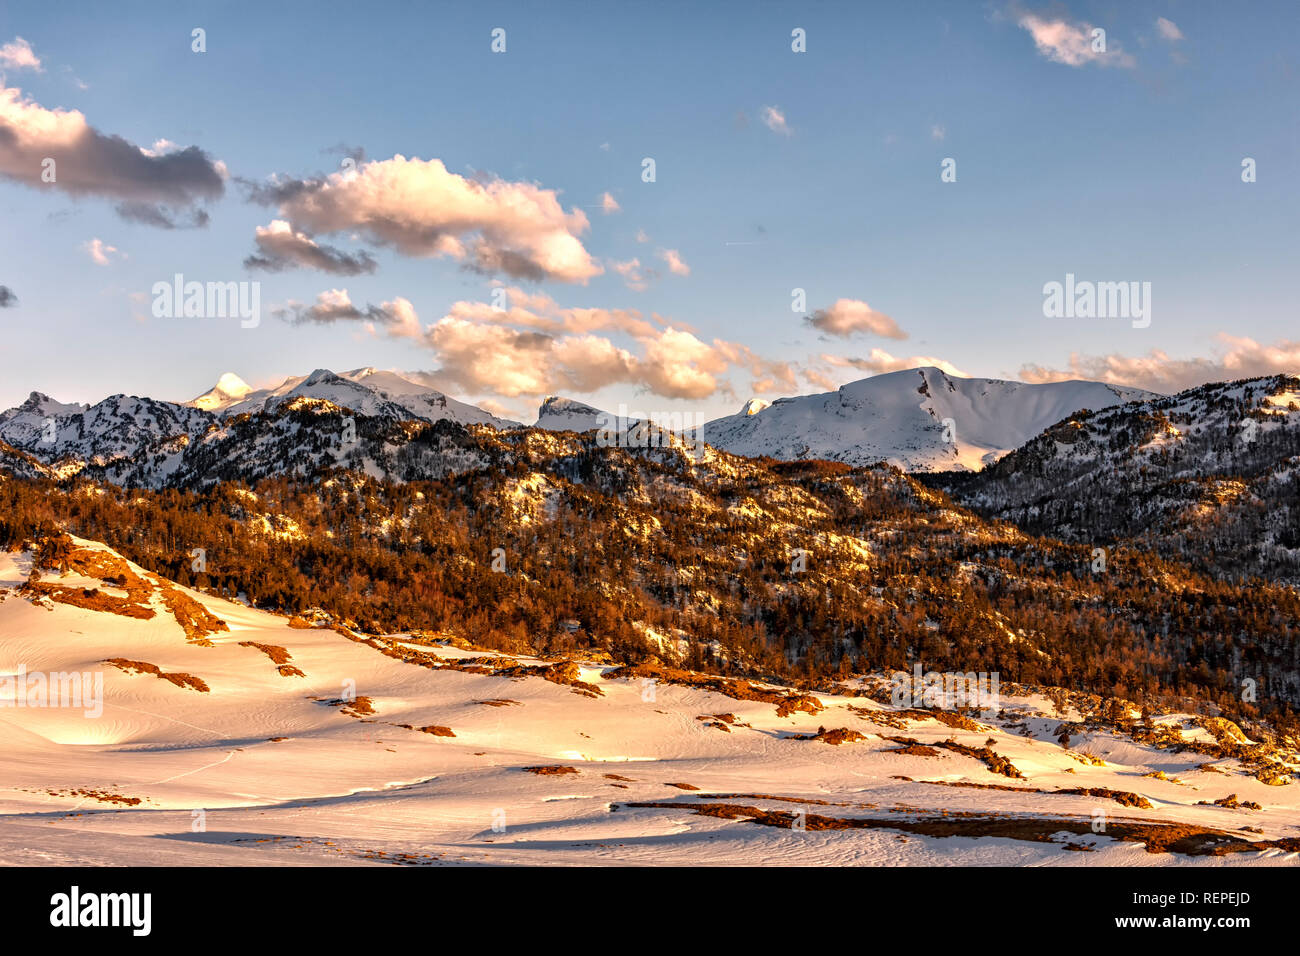 snowy landscape in the north of spain Stock Photo